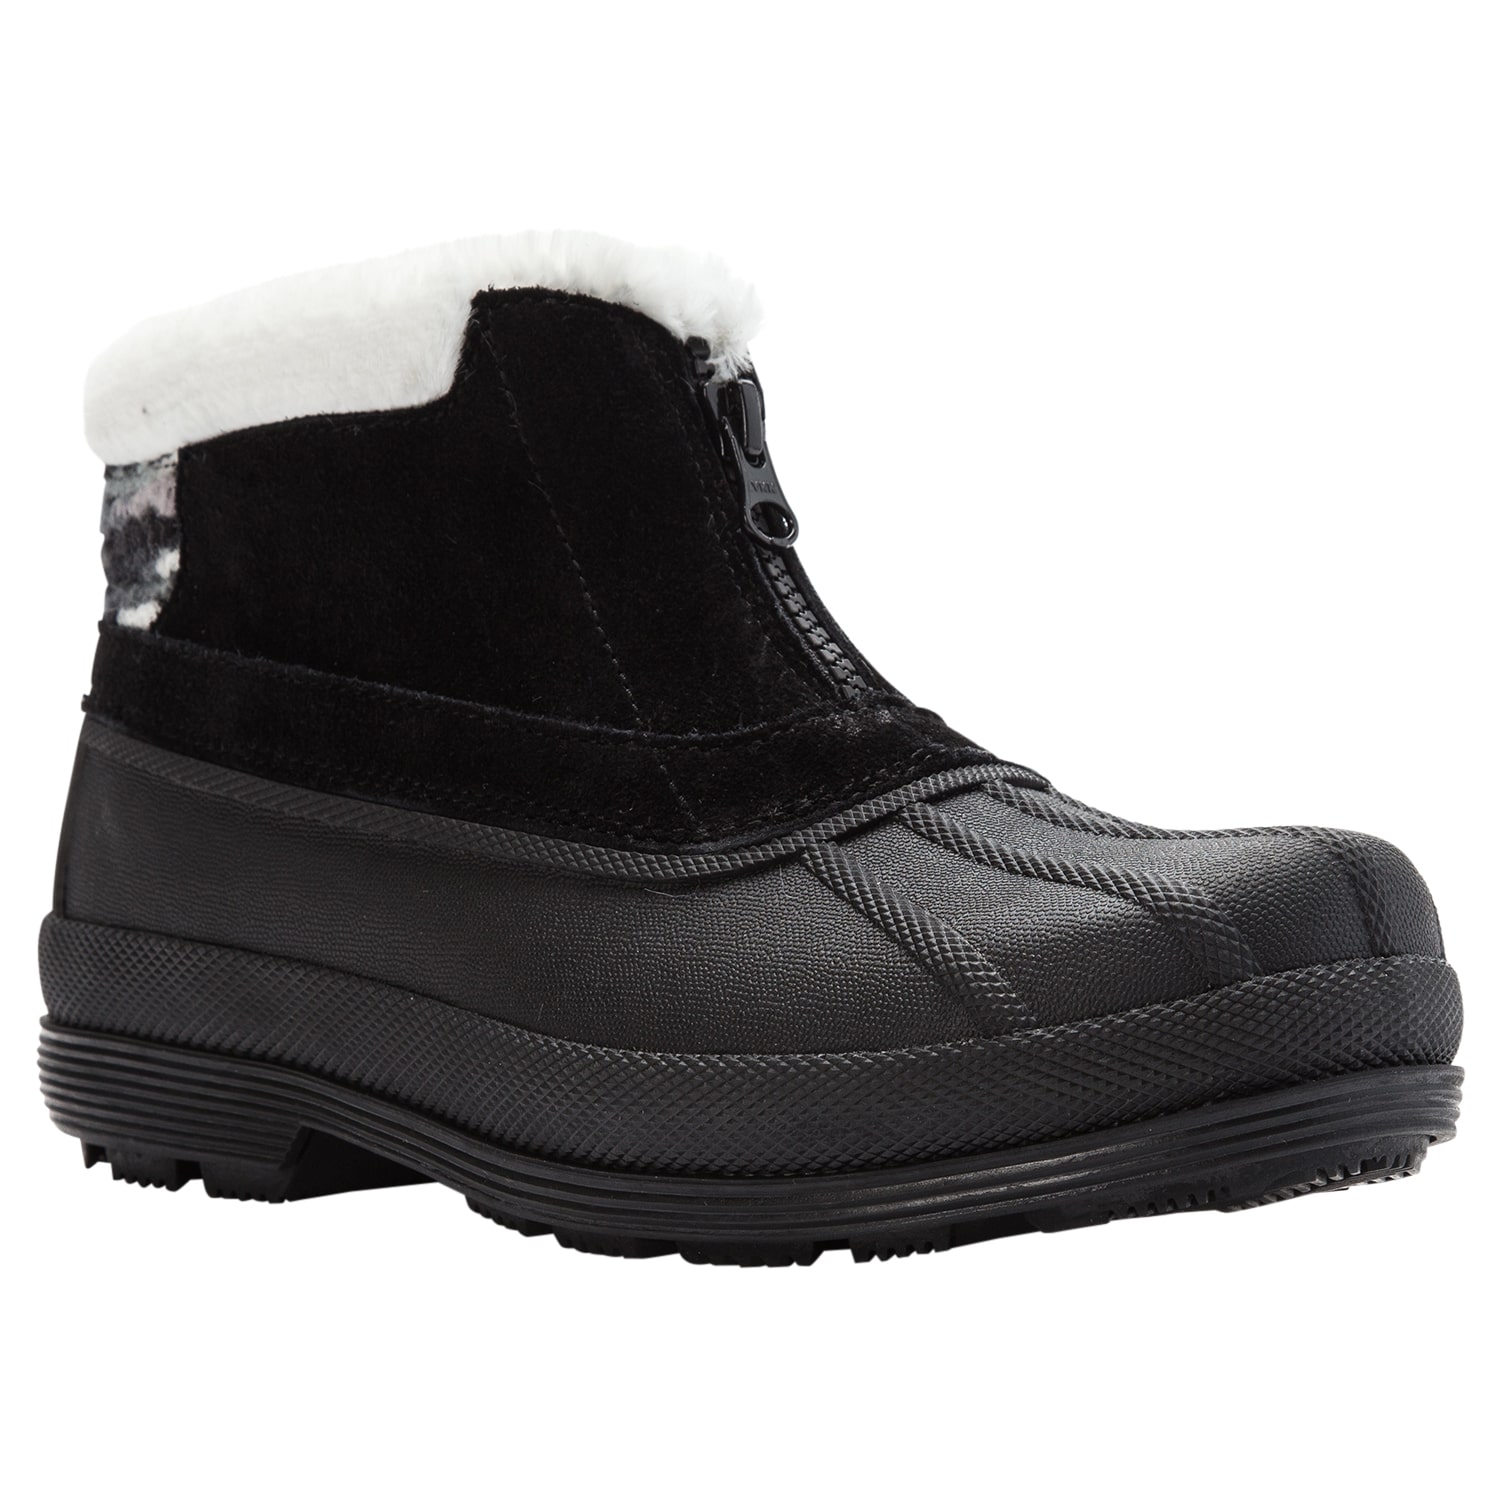 Propet Women's Lumi Ankle Zip Boots with waterproof construction